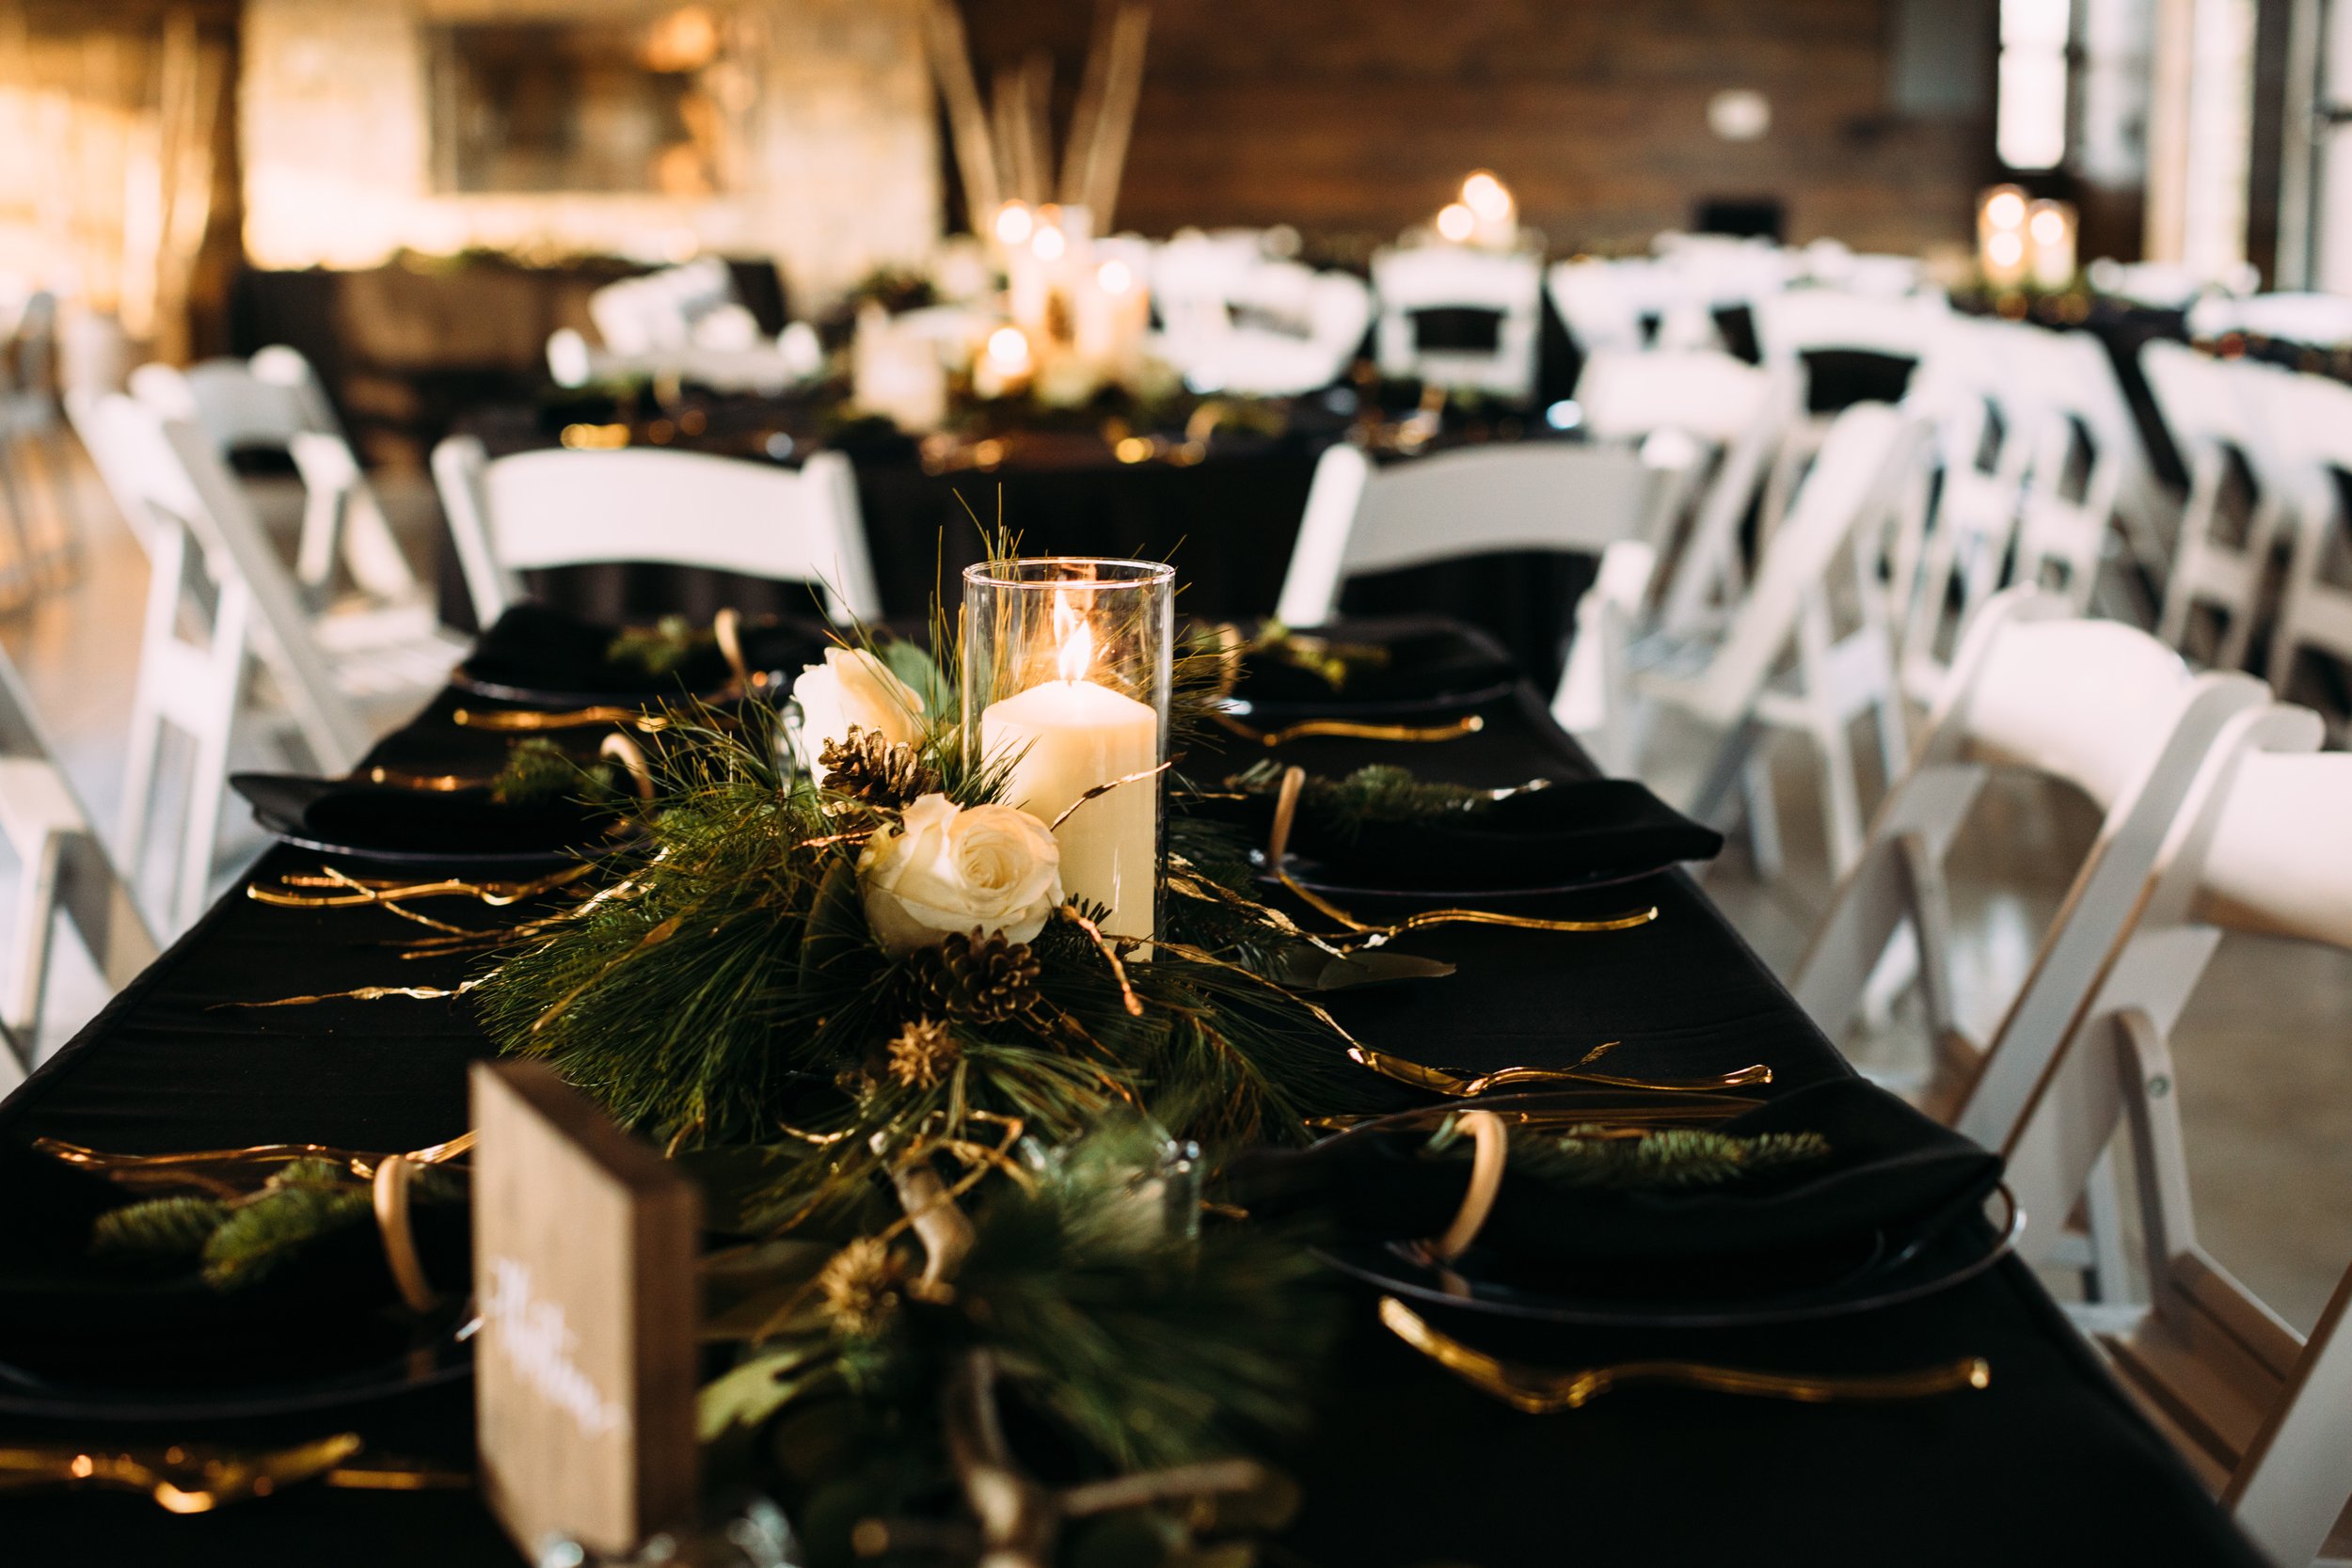  Teala Ward Photography captures a wedding table set up with black tablecloths, candles, and gold silverware. winter wedding table decor gold #tealawardphotography #tealawardweddings #LaSalleIllinois #IronwoodontheVermillion #weddingphotographyIL 